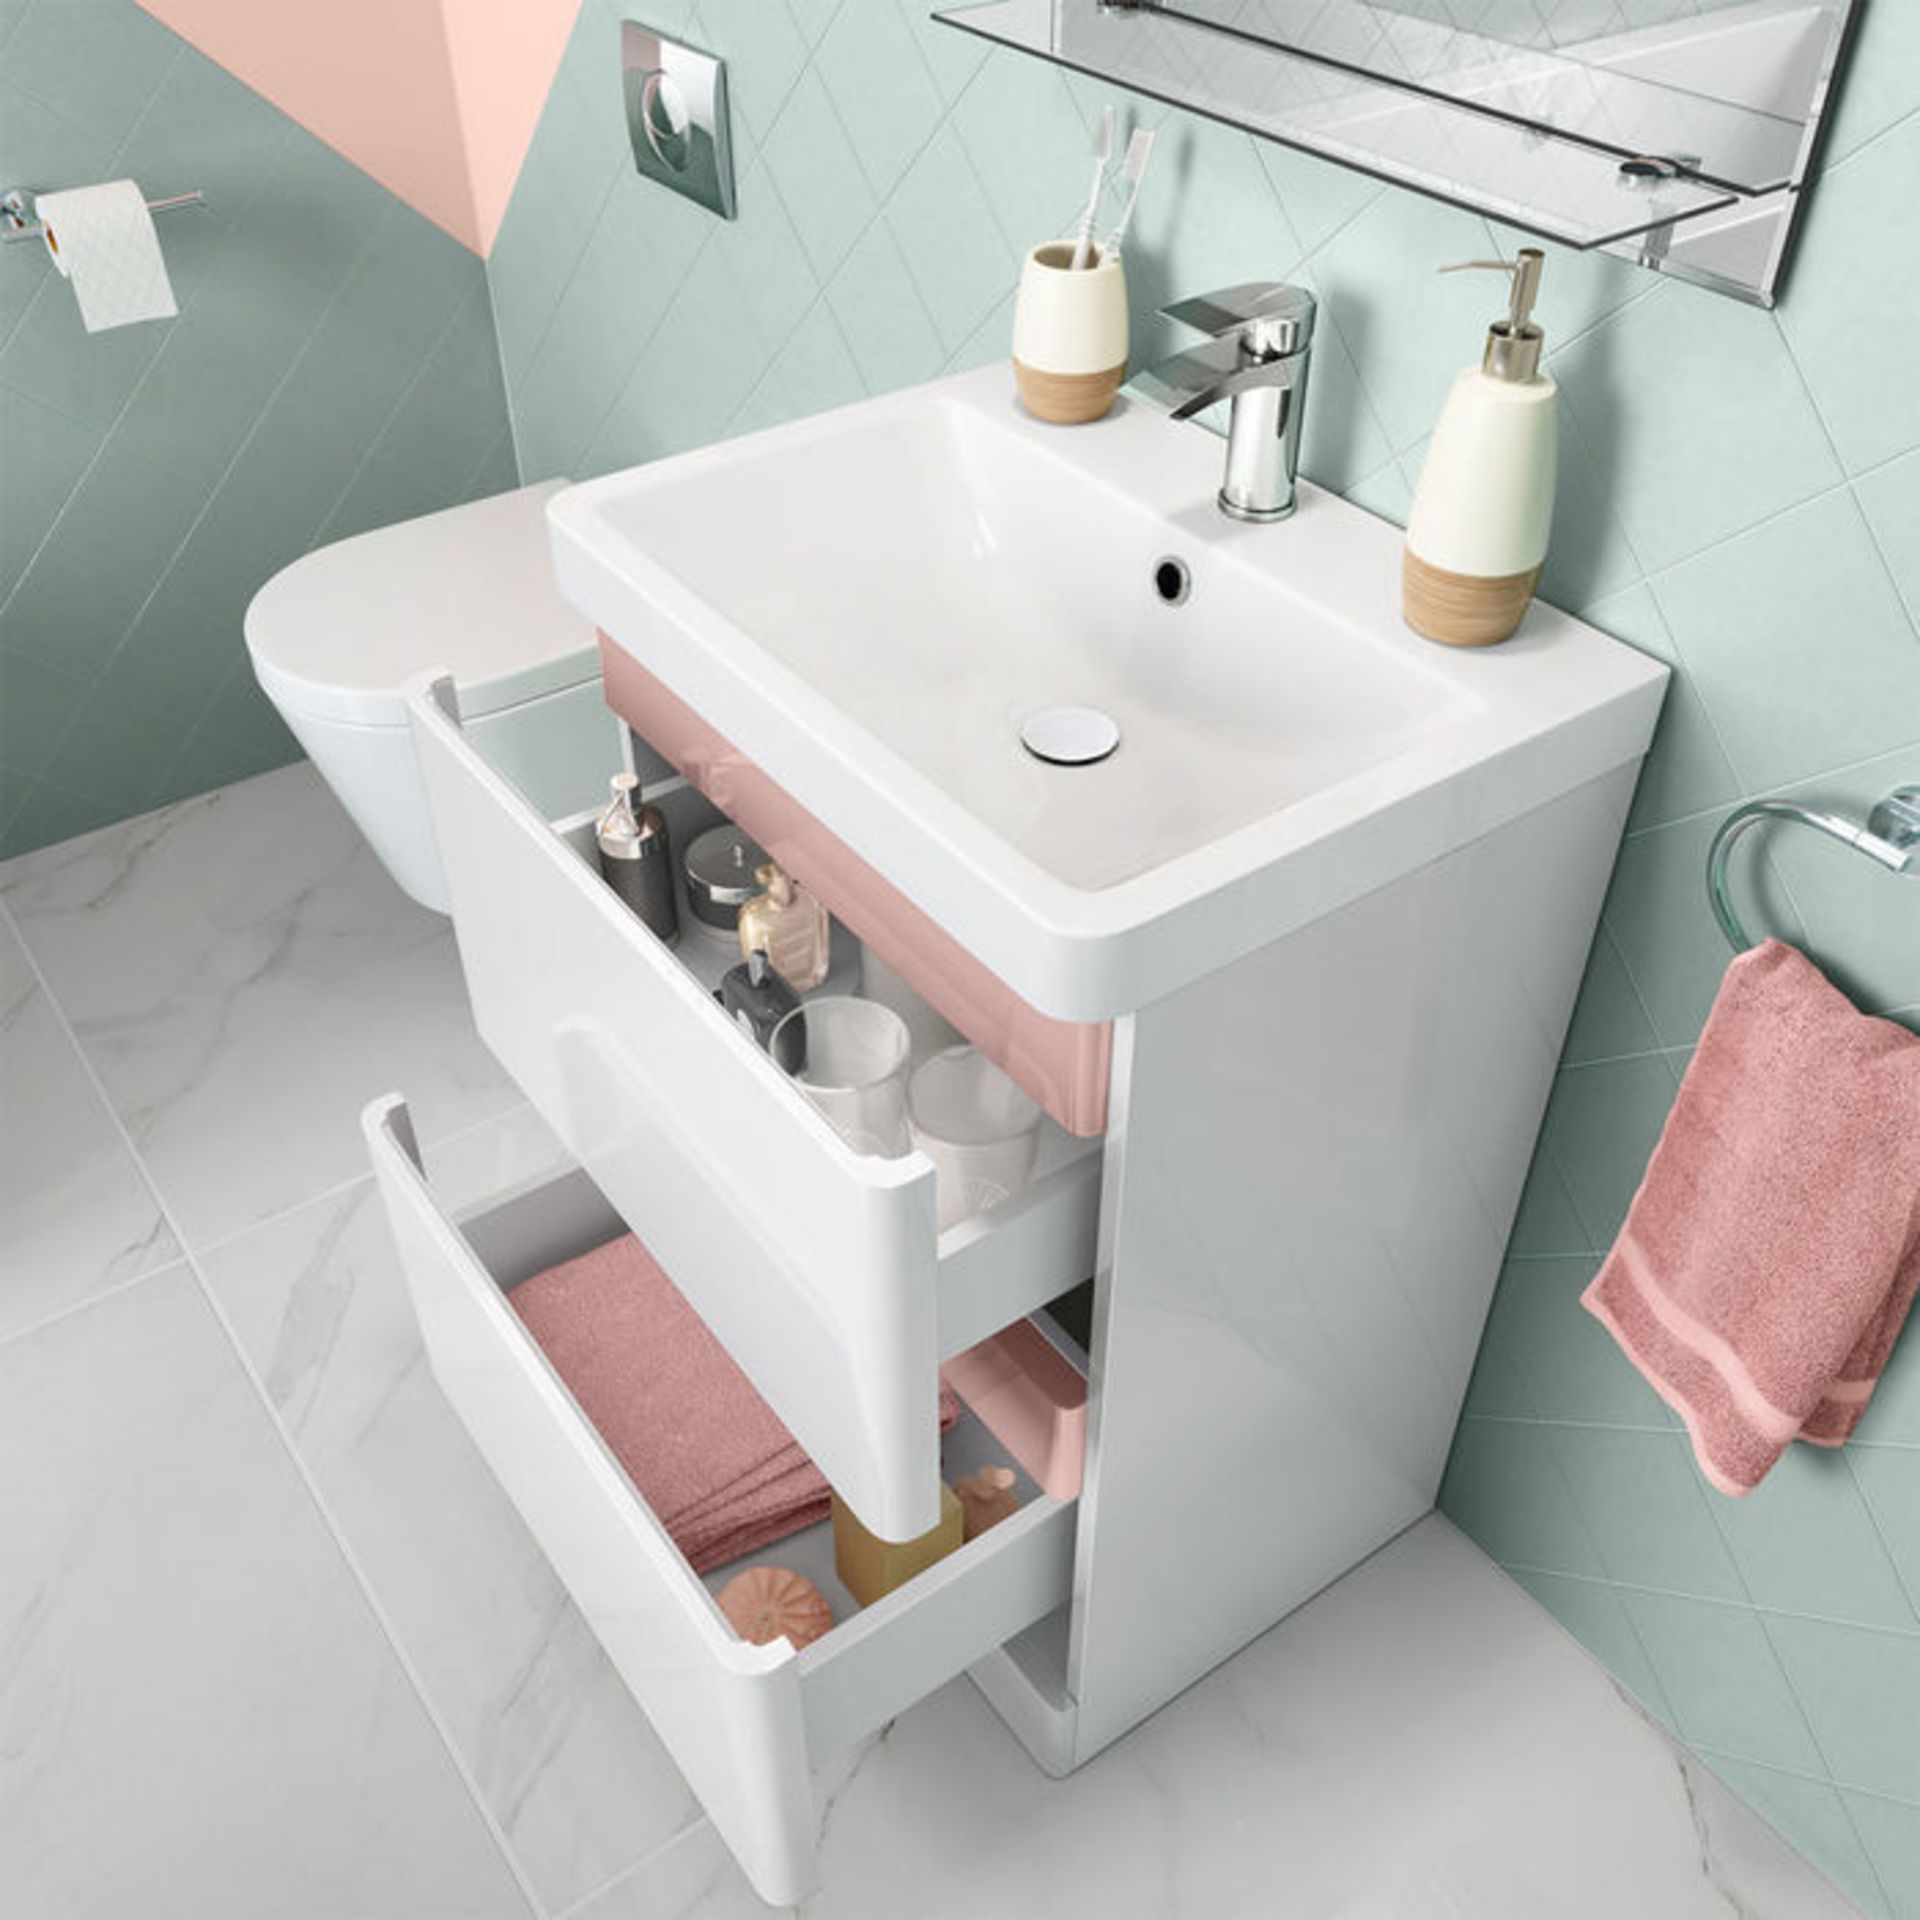 New & Boxed 600mm Denver Floor Standing Vanity Unit - Rose Gold Edition. RRP £749.99.Comes Complete - Image 2 of 3